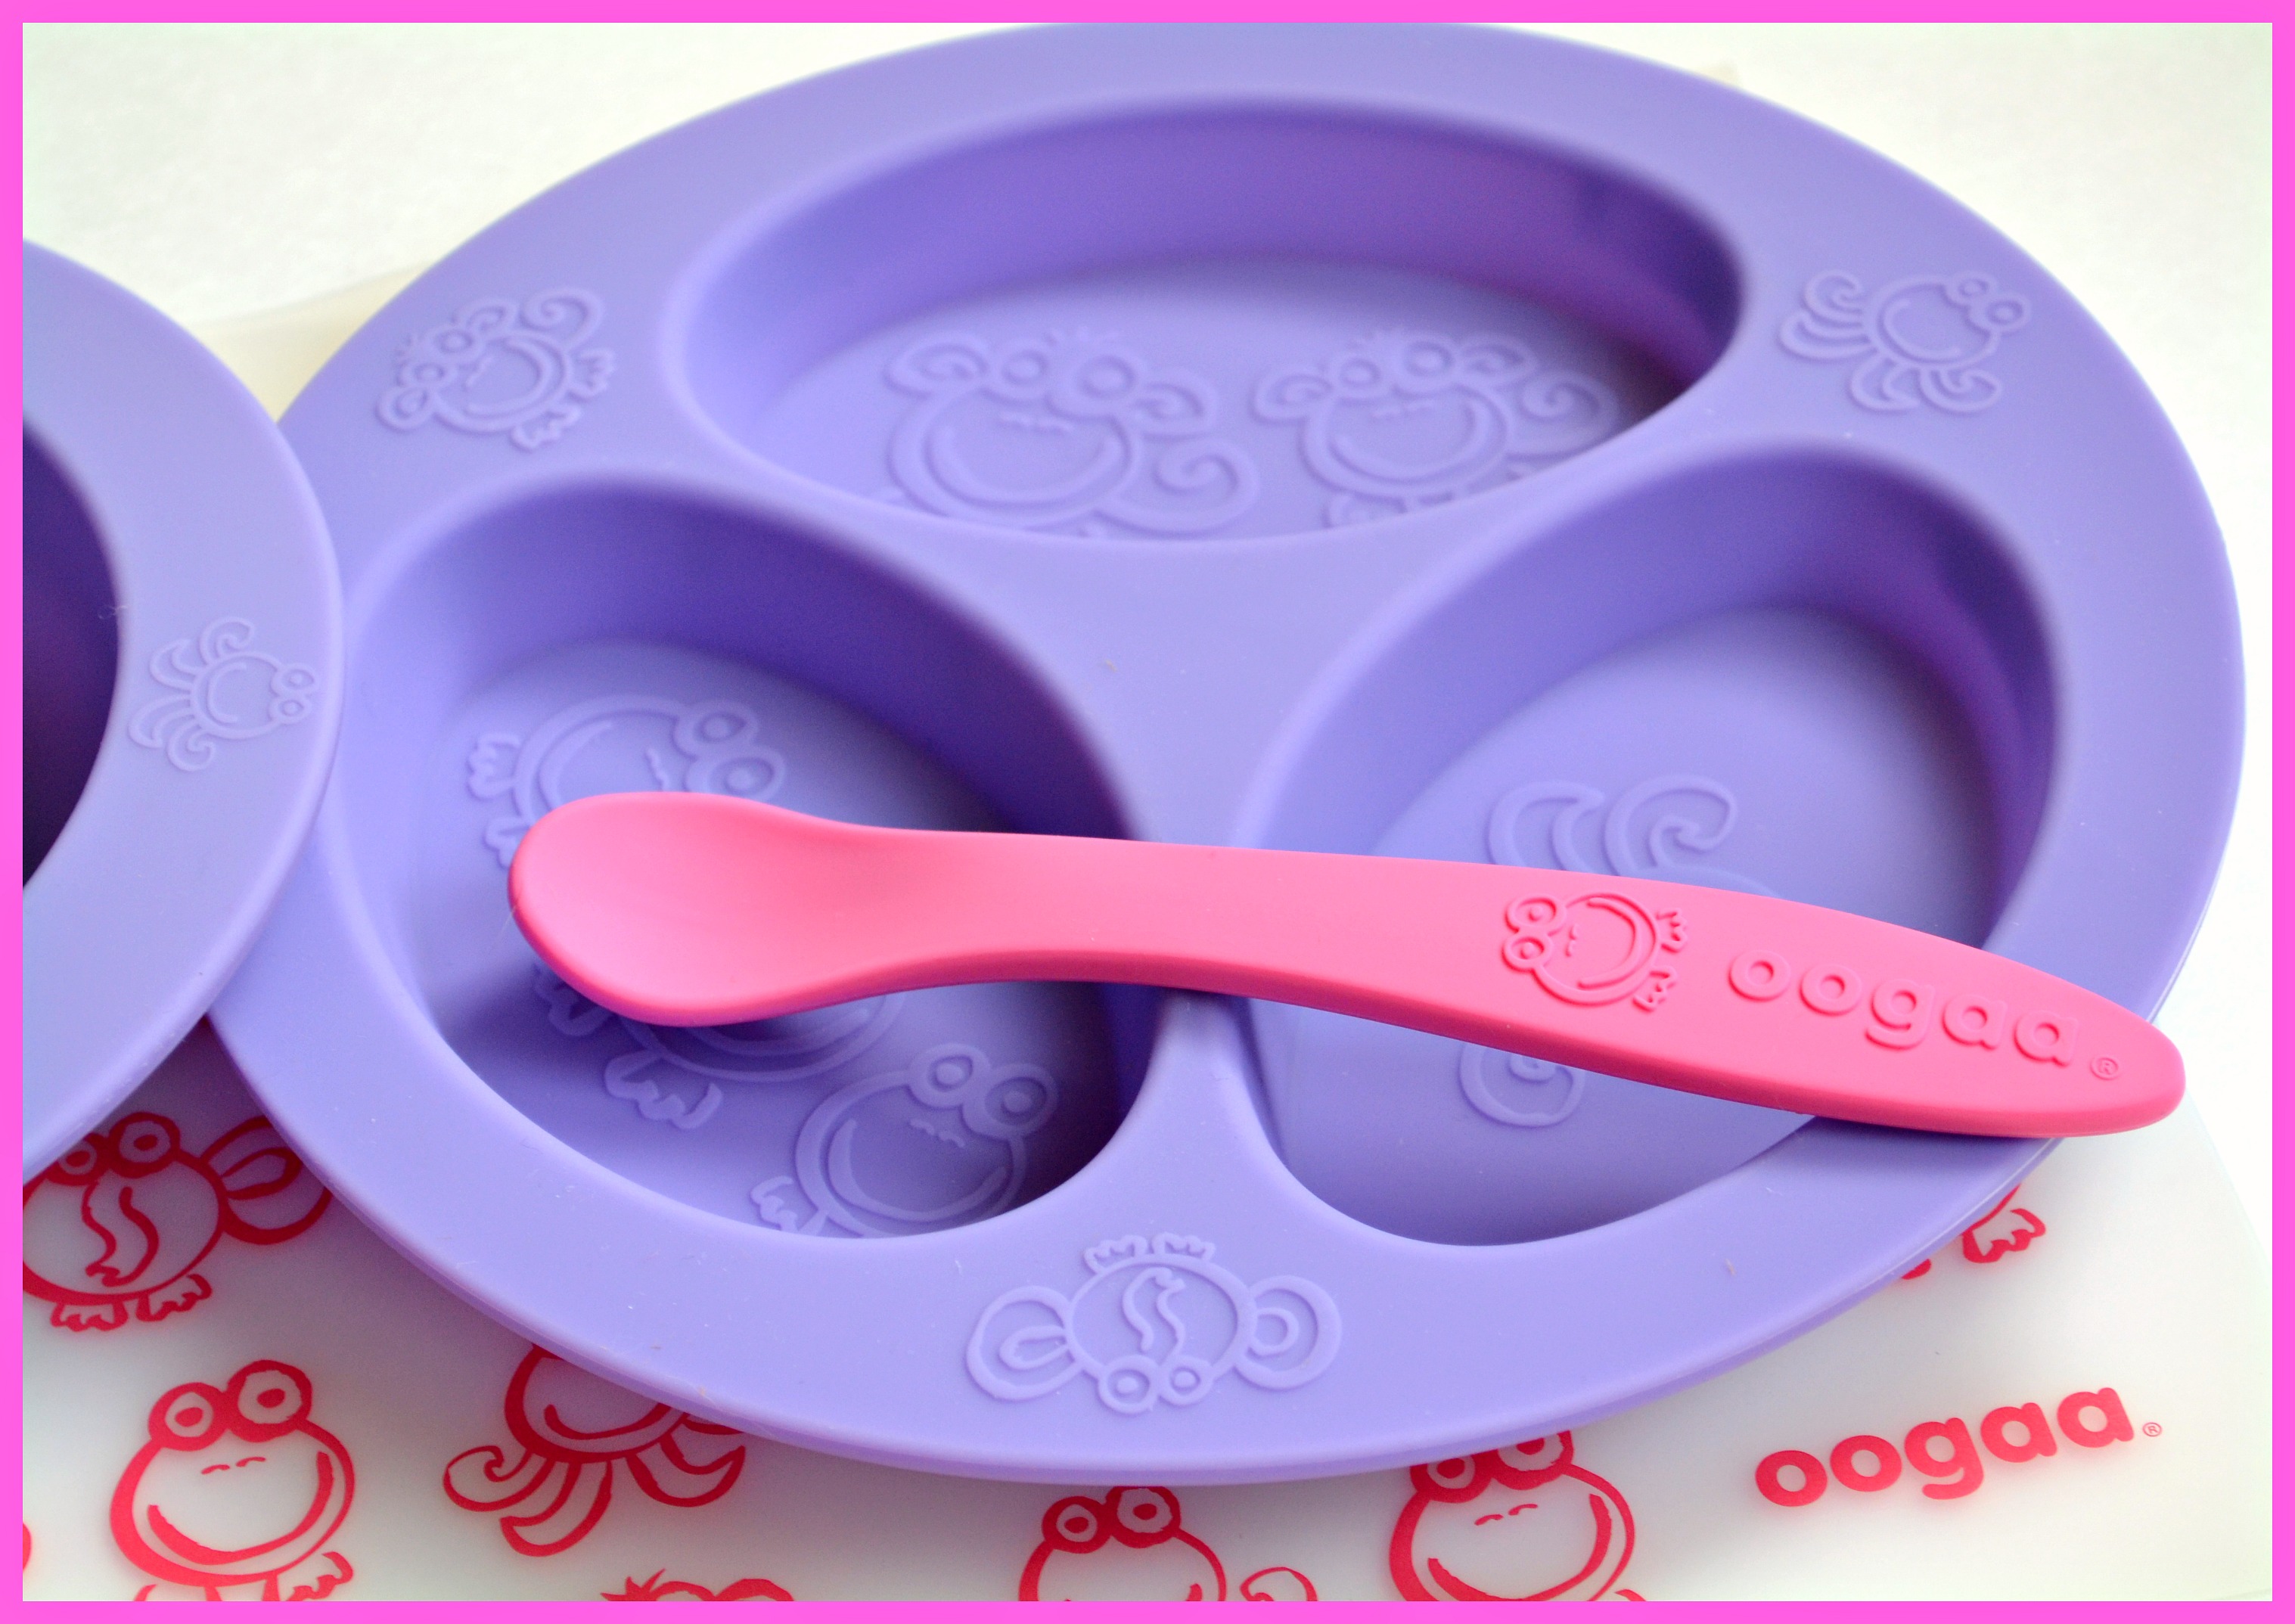 ooga: Baby Silicone Feeding Products Review (Getting Ready For Baby Gift Guide)